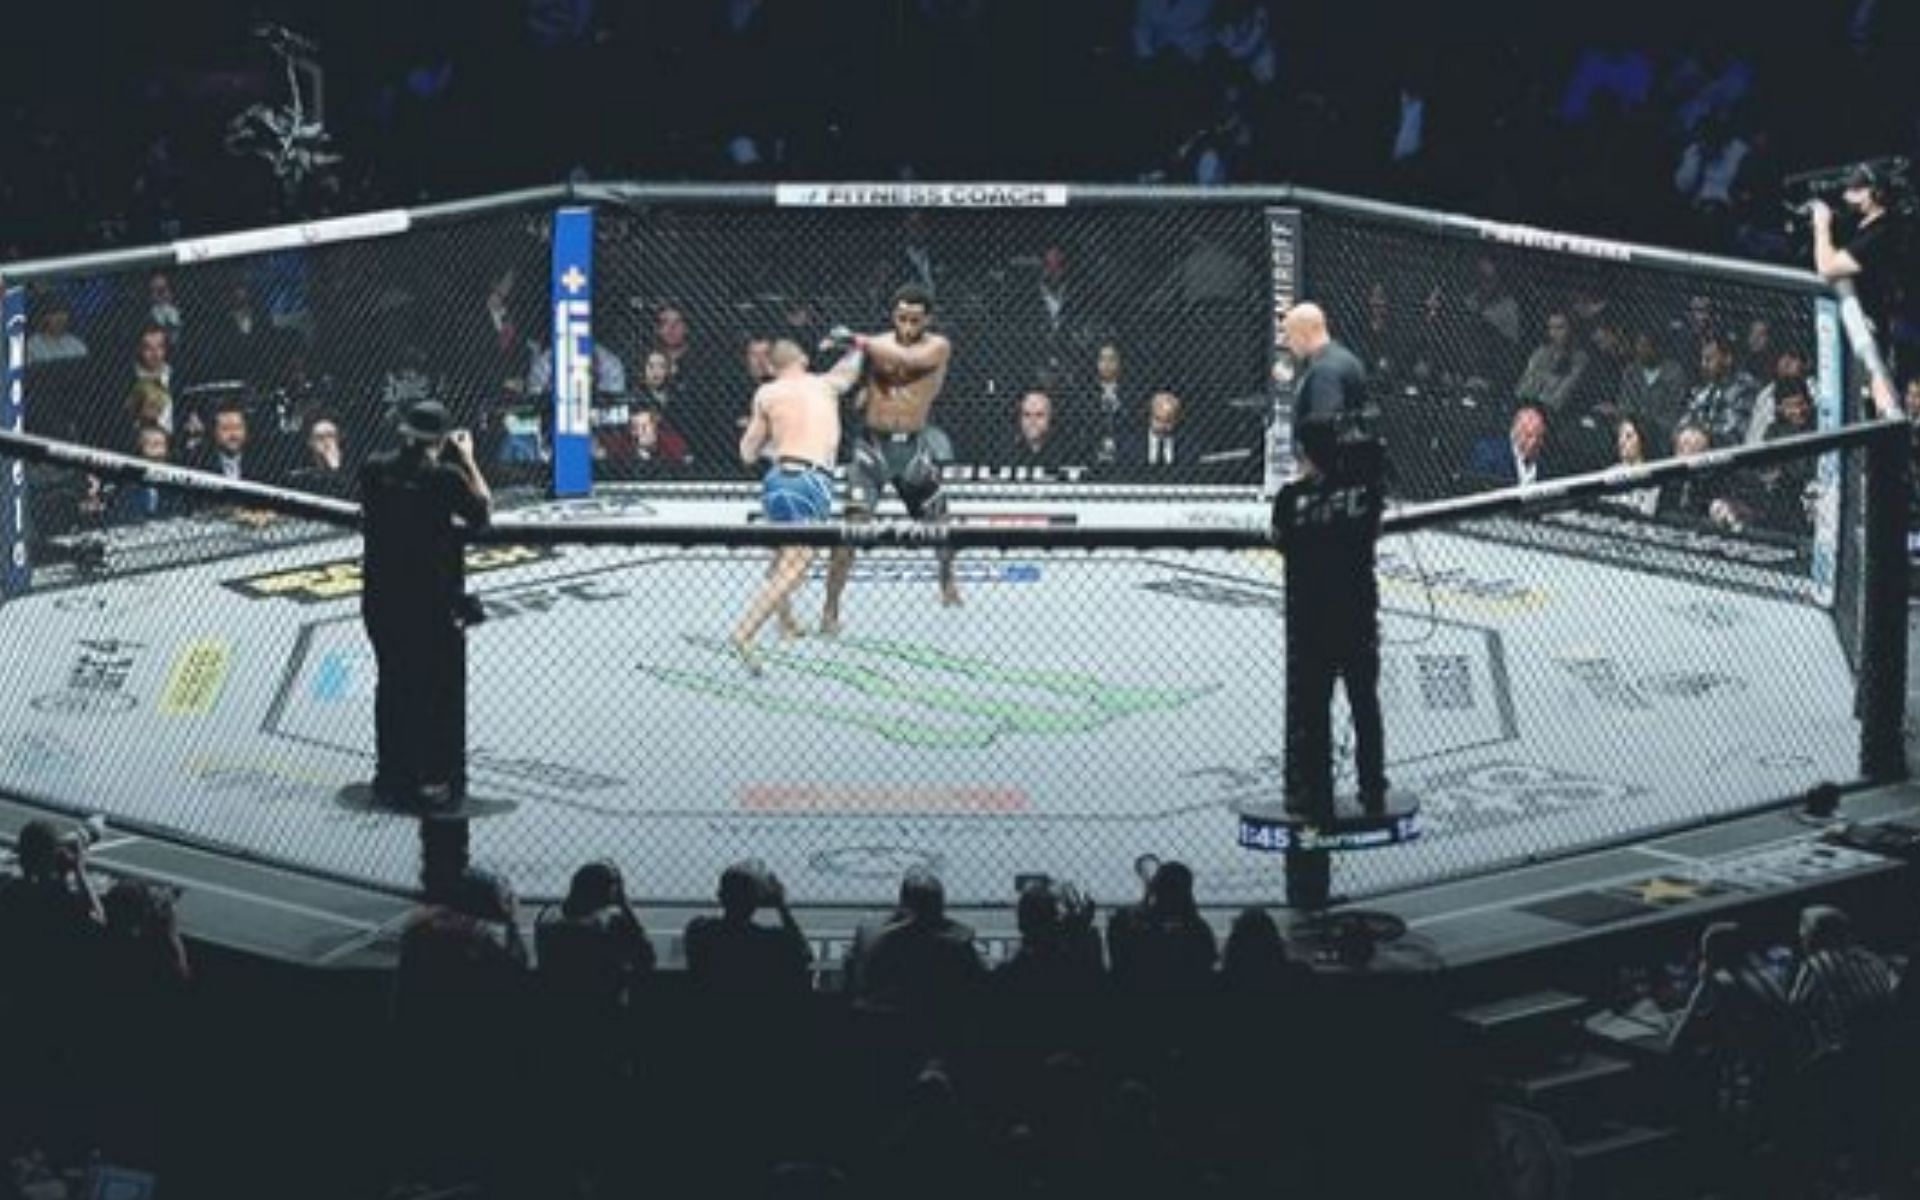 An Image of the UFC octagon during a Fight Night [Image courtesy @ufc on Instagram]